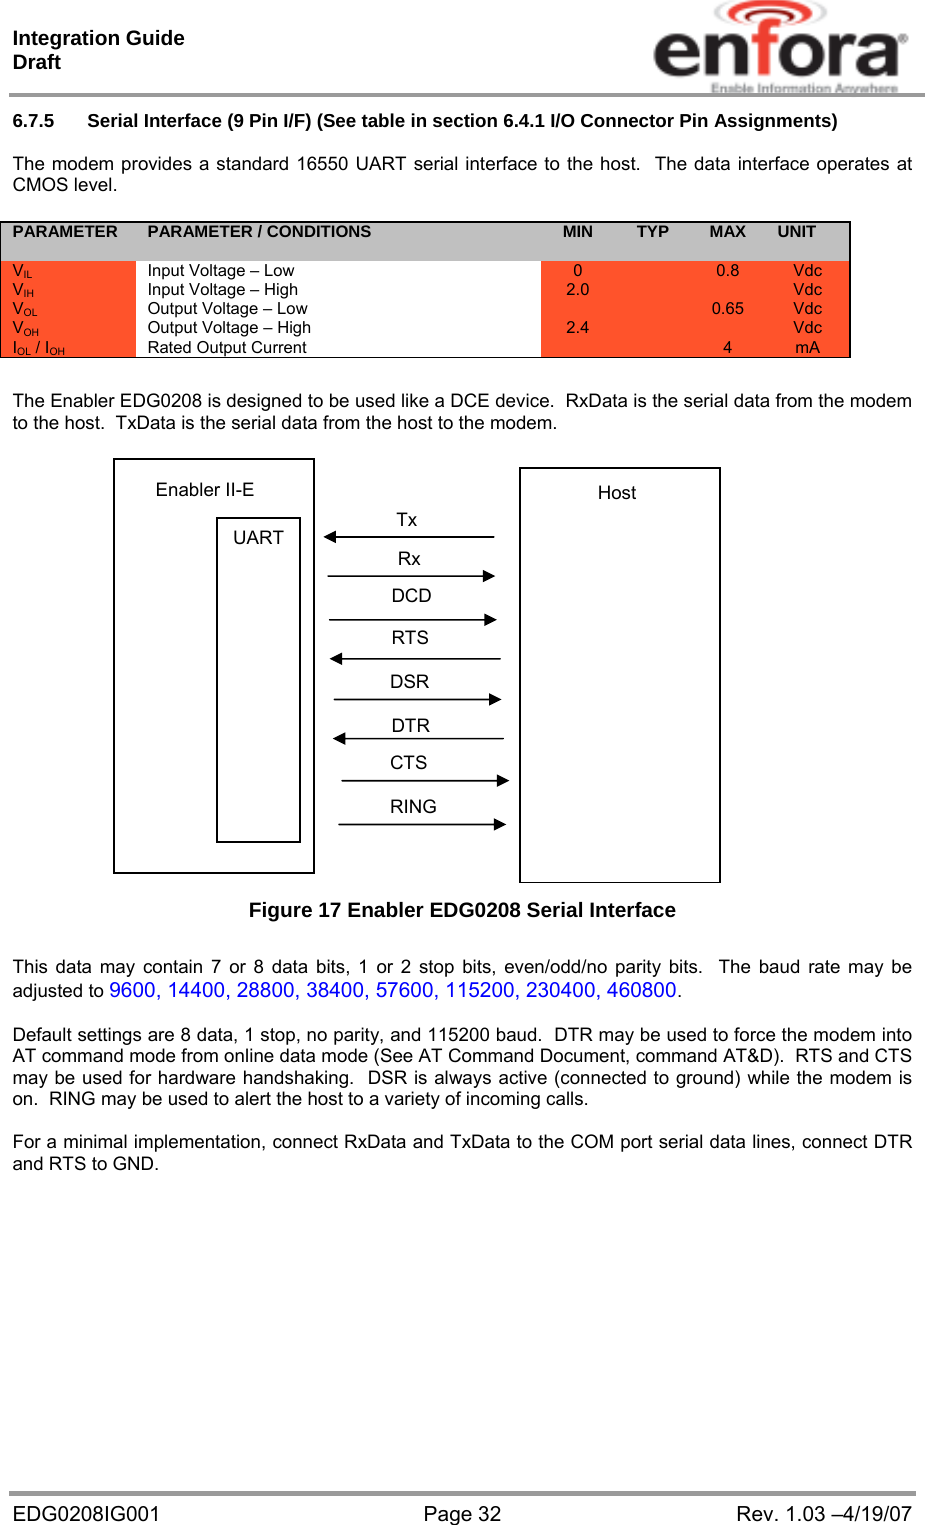 Integration Guide  Draft EDG0208IG001  Page 32  Rev. 1.03 –4/19/07 6.7.5  Serial Interface (9 Pin I/F) (See table in section 6.4.1 I/O Connector Pin Assignments)  The modem provides a standard 16550 UART serial interface to the host.  The data interface operates at CMOS level.            The Enabler EDG0208 is designed to be used like a DCE device.  RxData is the serial data from the modem to the host.  TxData is the serial data from the host to the modem.                       Figure 17 Enabler EDG0208 Serial Interface  This data may contain 7 or 8 data bits, 1 or 2 stop bits, even/odd/no parity bits.  The baud rate may be adjusted to 9600, 14400, 28800, 38400, 57600, 115200, 230400, 460800.  Default settings are 8 data, 1 stop, no parity, and 115200 baud.  DTR may be used to force the modem into AT command mode from online data mode (See AT Command Document, command AT&amp;D).  RTS and CTS may be used for hardware handshaking.  DSR is always active (connected to ground) while the modem is on.  RING may be used to alert the host to a variety of incoming calls.  For a minimal implementation, connect RxData and TxData to the COM port serial data lines, connect DTR and RTS to GND.  PARAMETER PARAMETER / CONDITIONS MIN  TYP  MAX  UNIT  VIL  Input Voltage – Low  0   0.8  Vdc VIH  Input Voltage – High  2.0      Vdc VOL  Output Voltage – Low      0.65  Vdc VOH  Output Voltage – High  2.4      Vdc IOL / IOH Rated Output Current      4  mA RING CTS DTR DSR RTS Rx Tx Enabler II-E UART DCD Host 